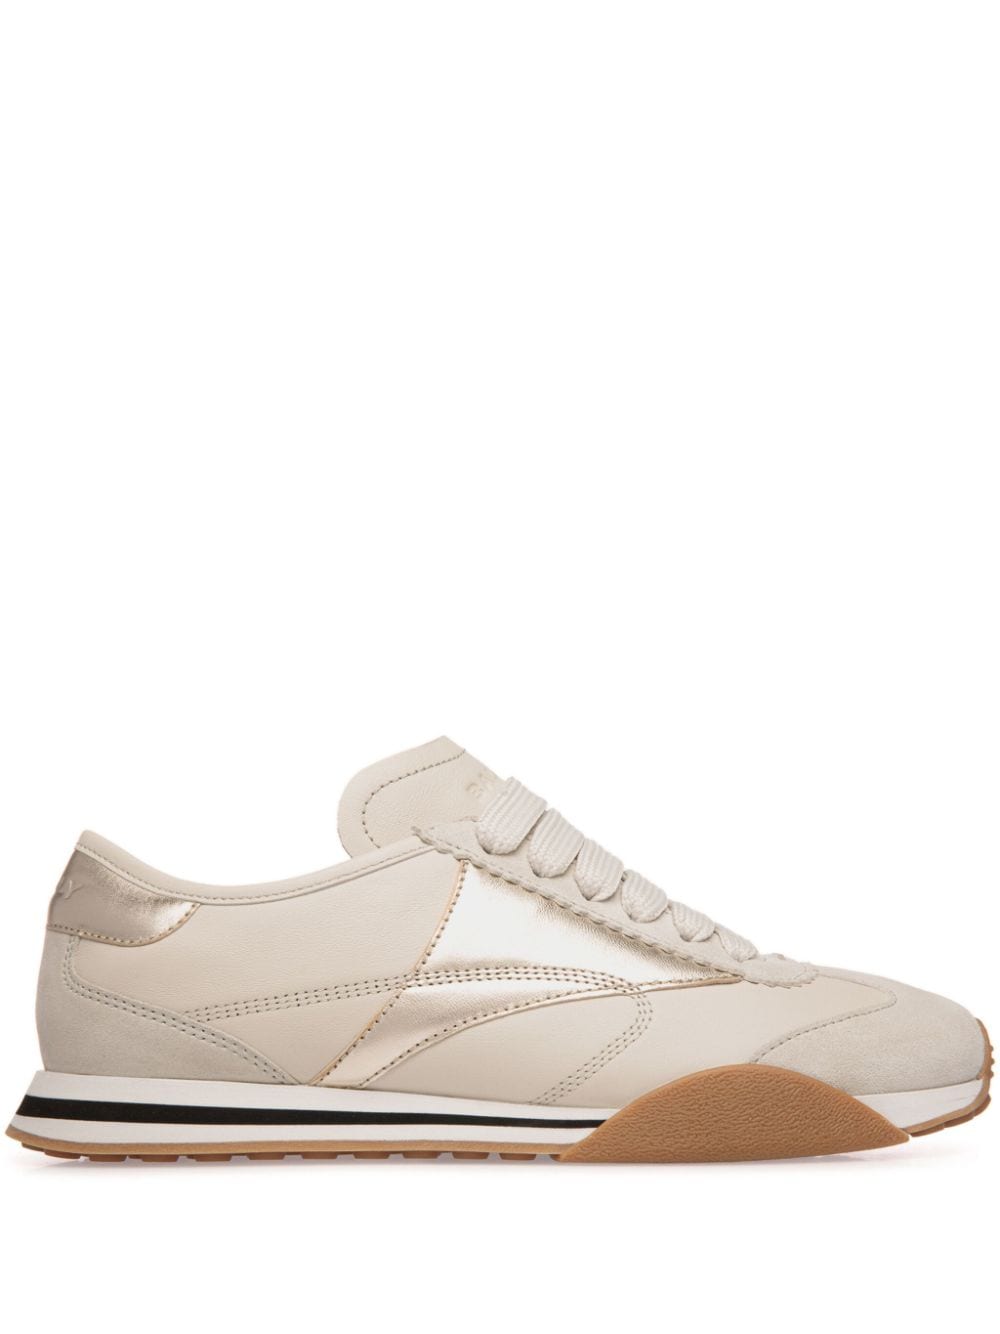 Bally Sussex Leather Sneakers In Neutrals